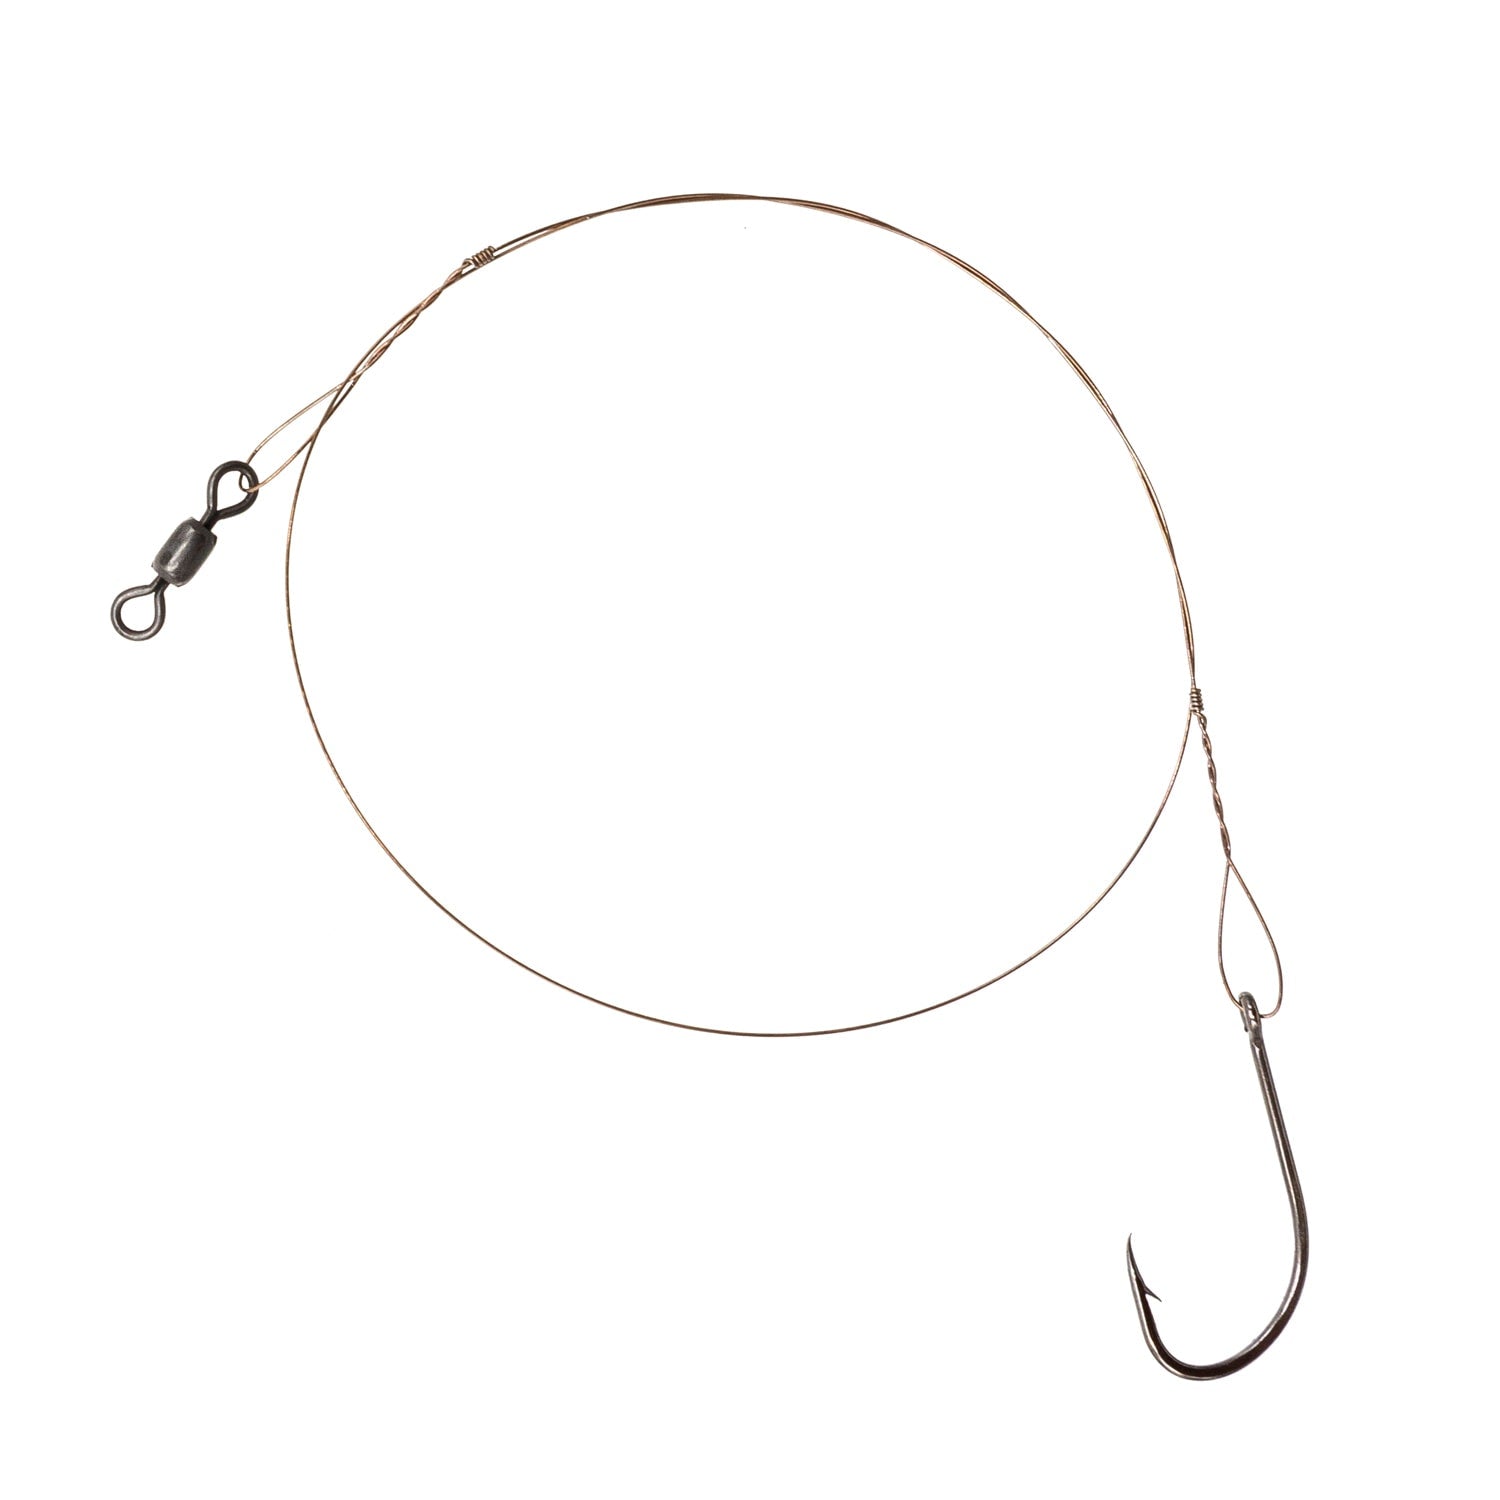  Rite Angler Wire Leader Rig Nylon Coated (6 Pack